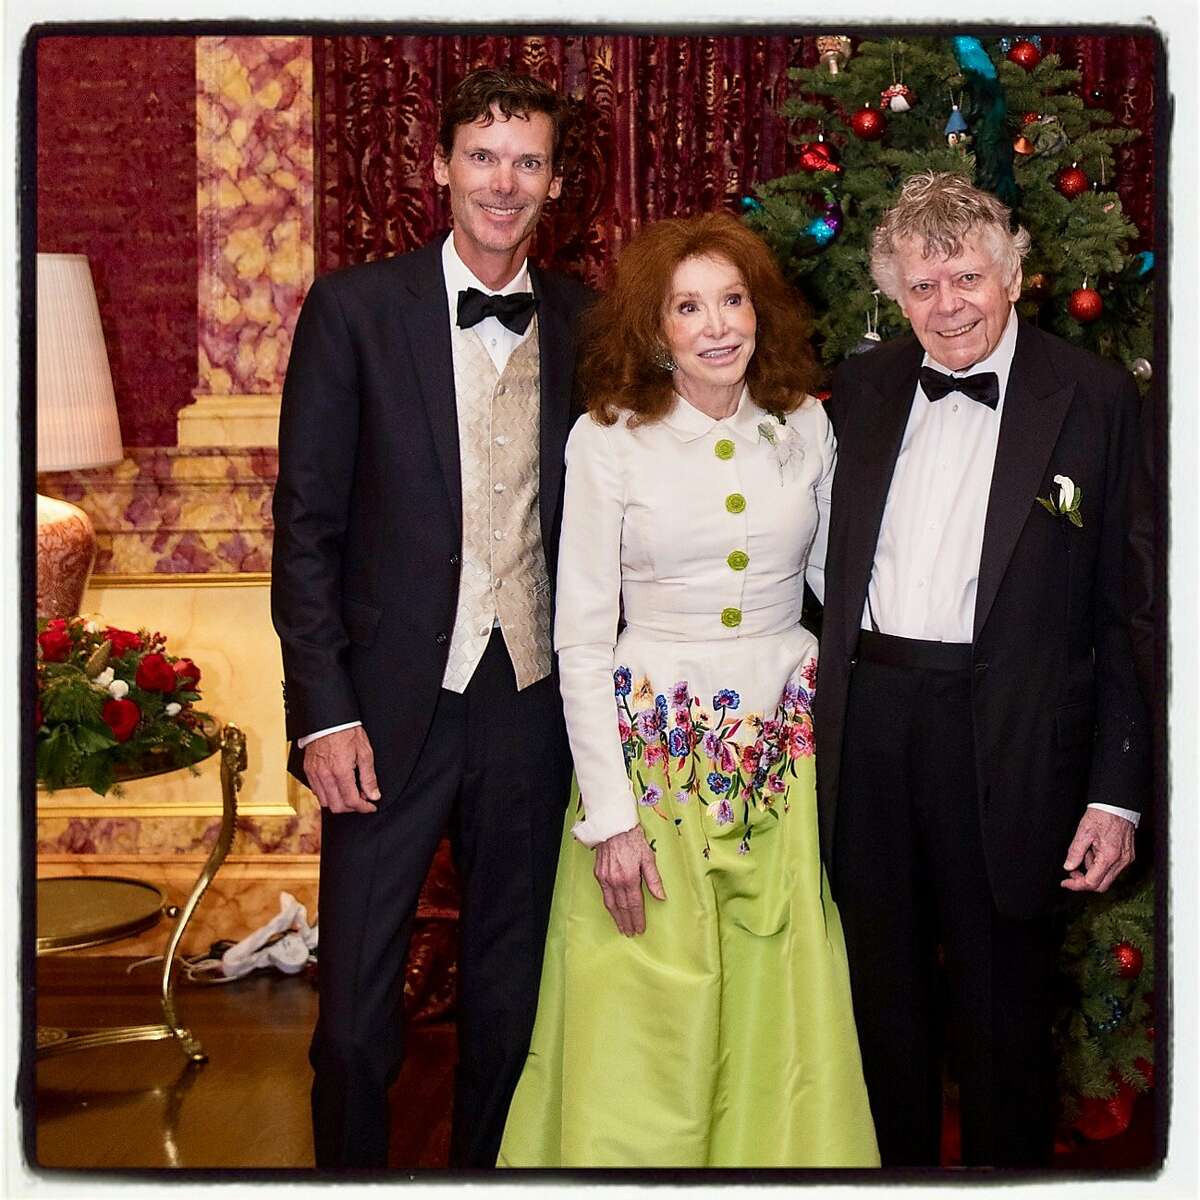 Bill Getty (left with his parents, Ann and Gordon Getty celebrate the wedding of Shannon and Peter Getty. Dec 2016